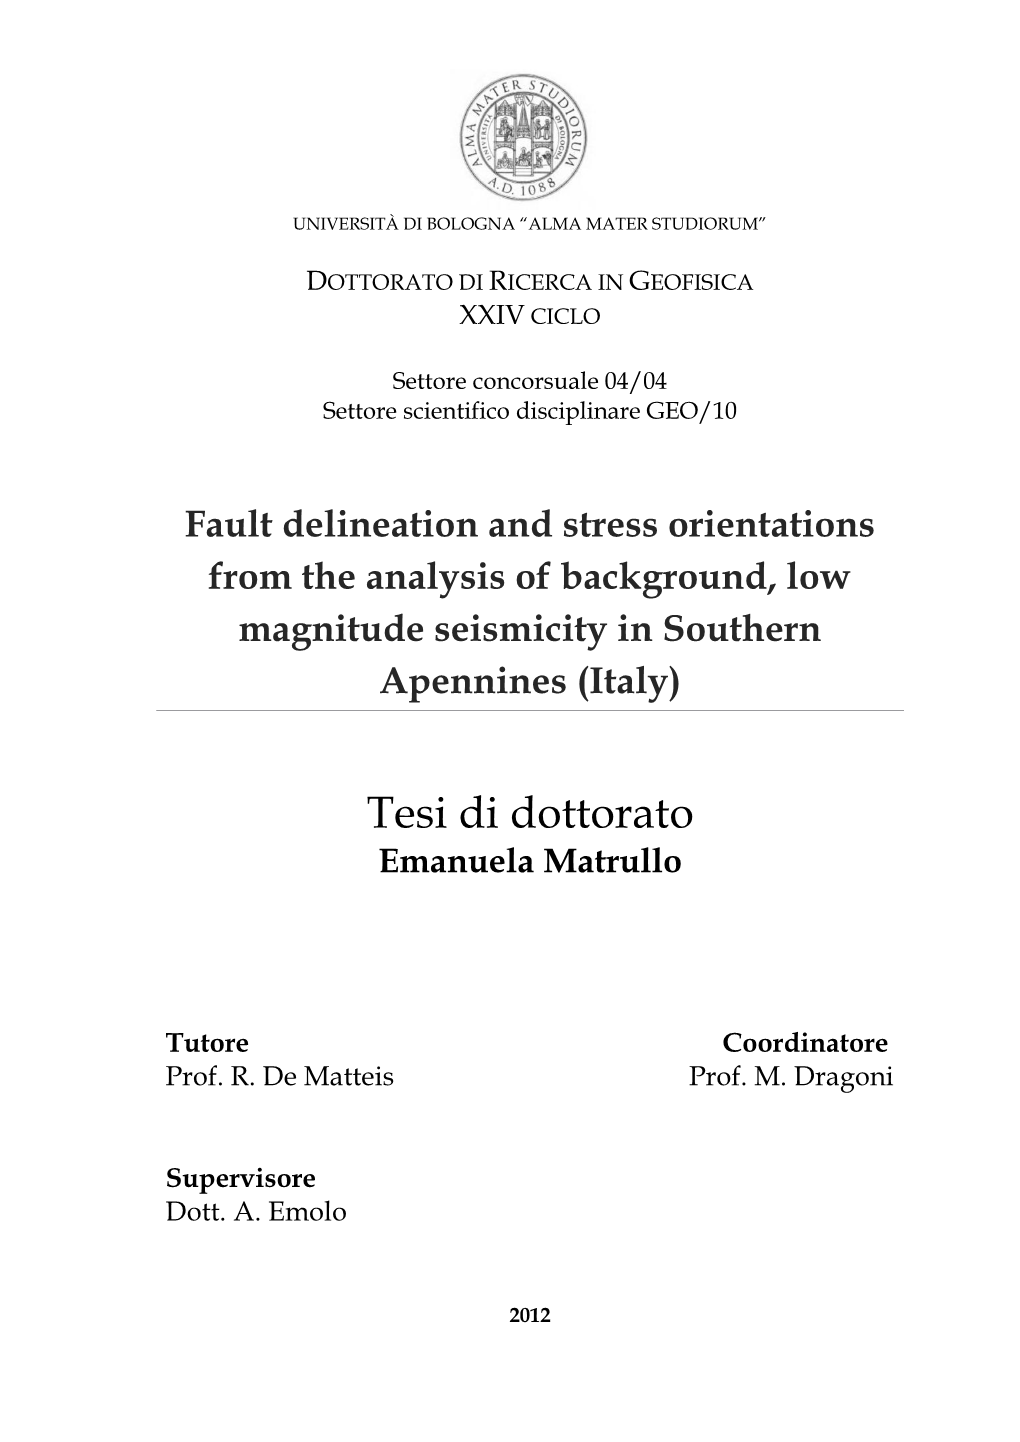 Fault Delineation and Stress Orientations from the Analysis of Background, Low Magnitude Seismicity in Southern Apennines (Italy)